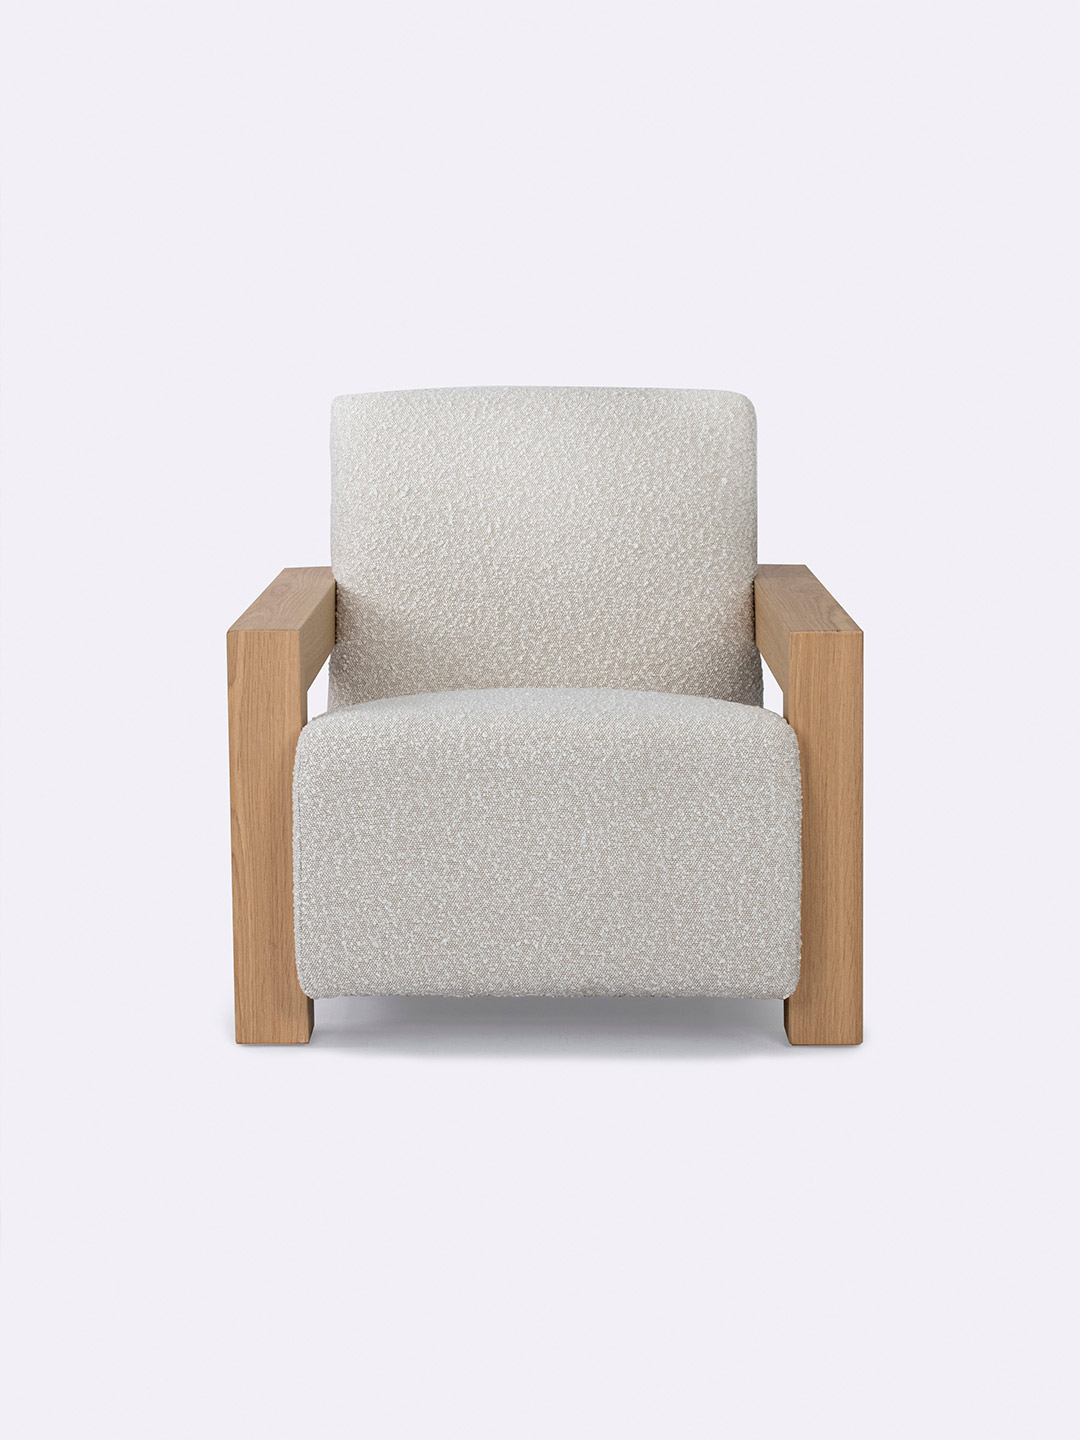 Archer Chair Pearl beige and natural oak arm Tallira Furniture The Rug Collection front